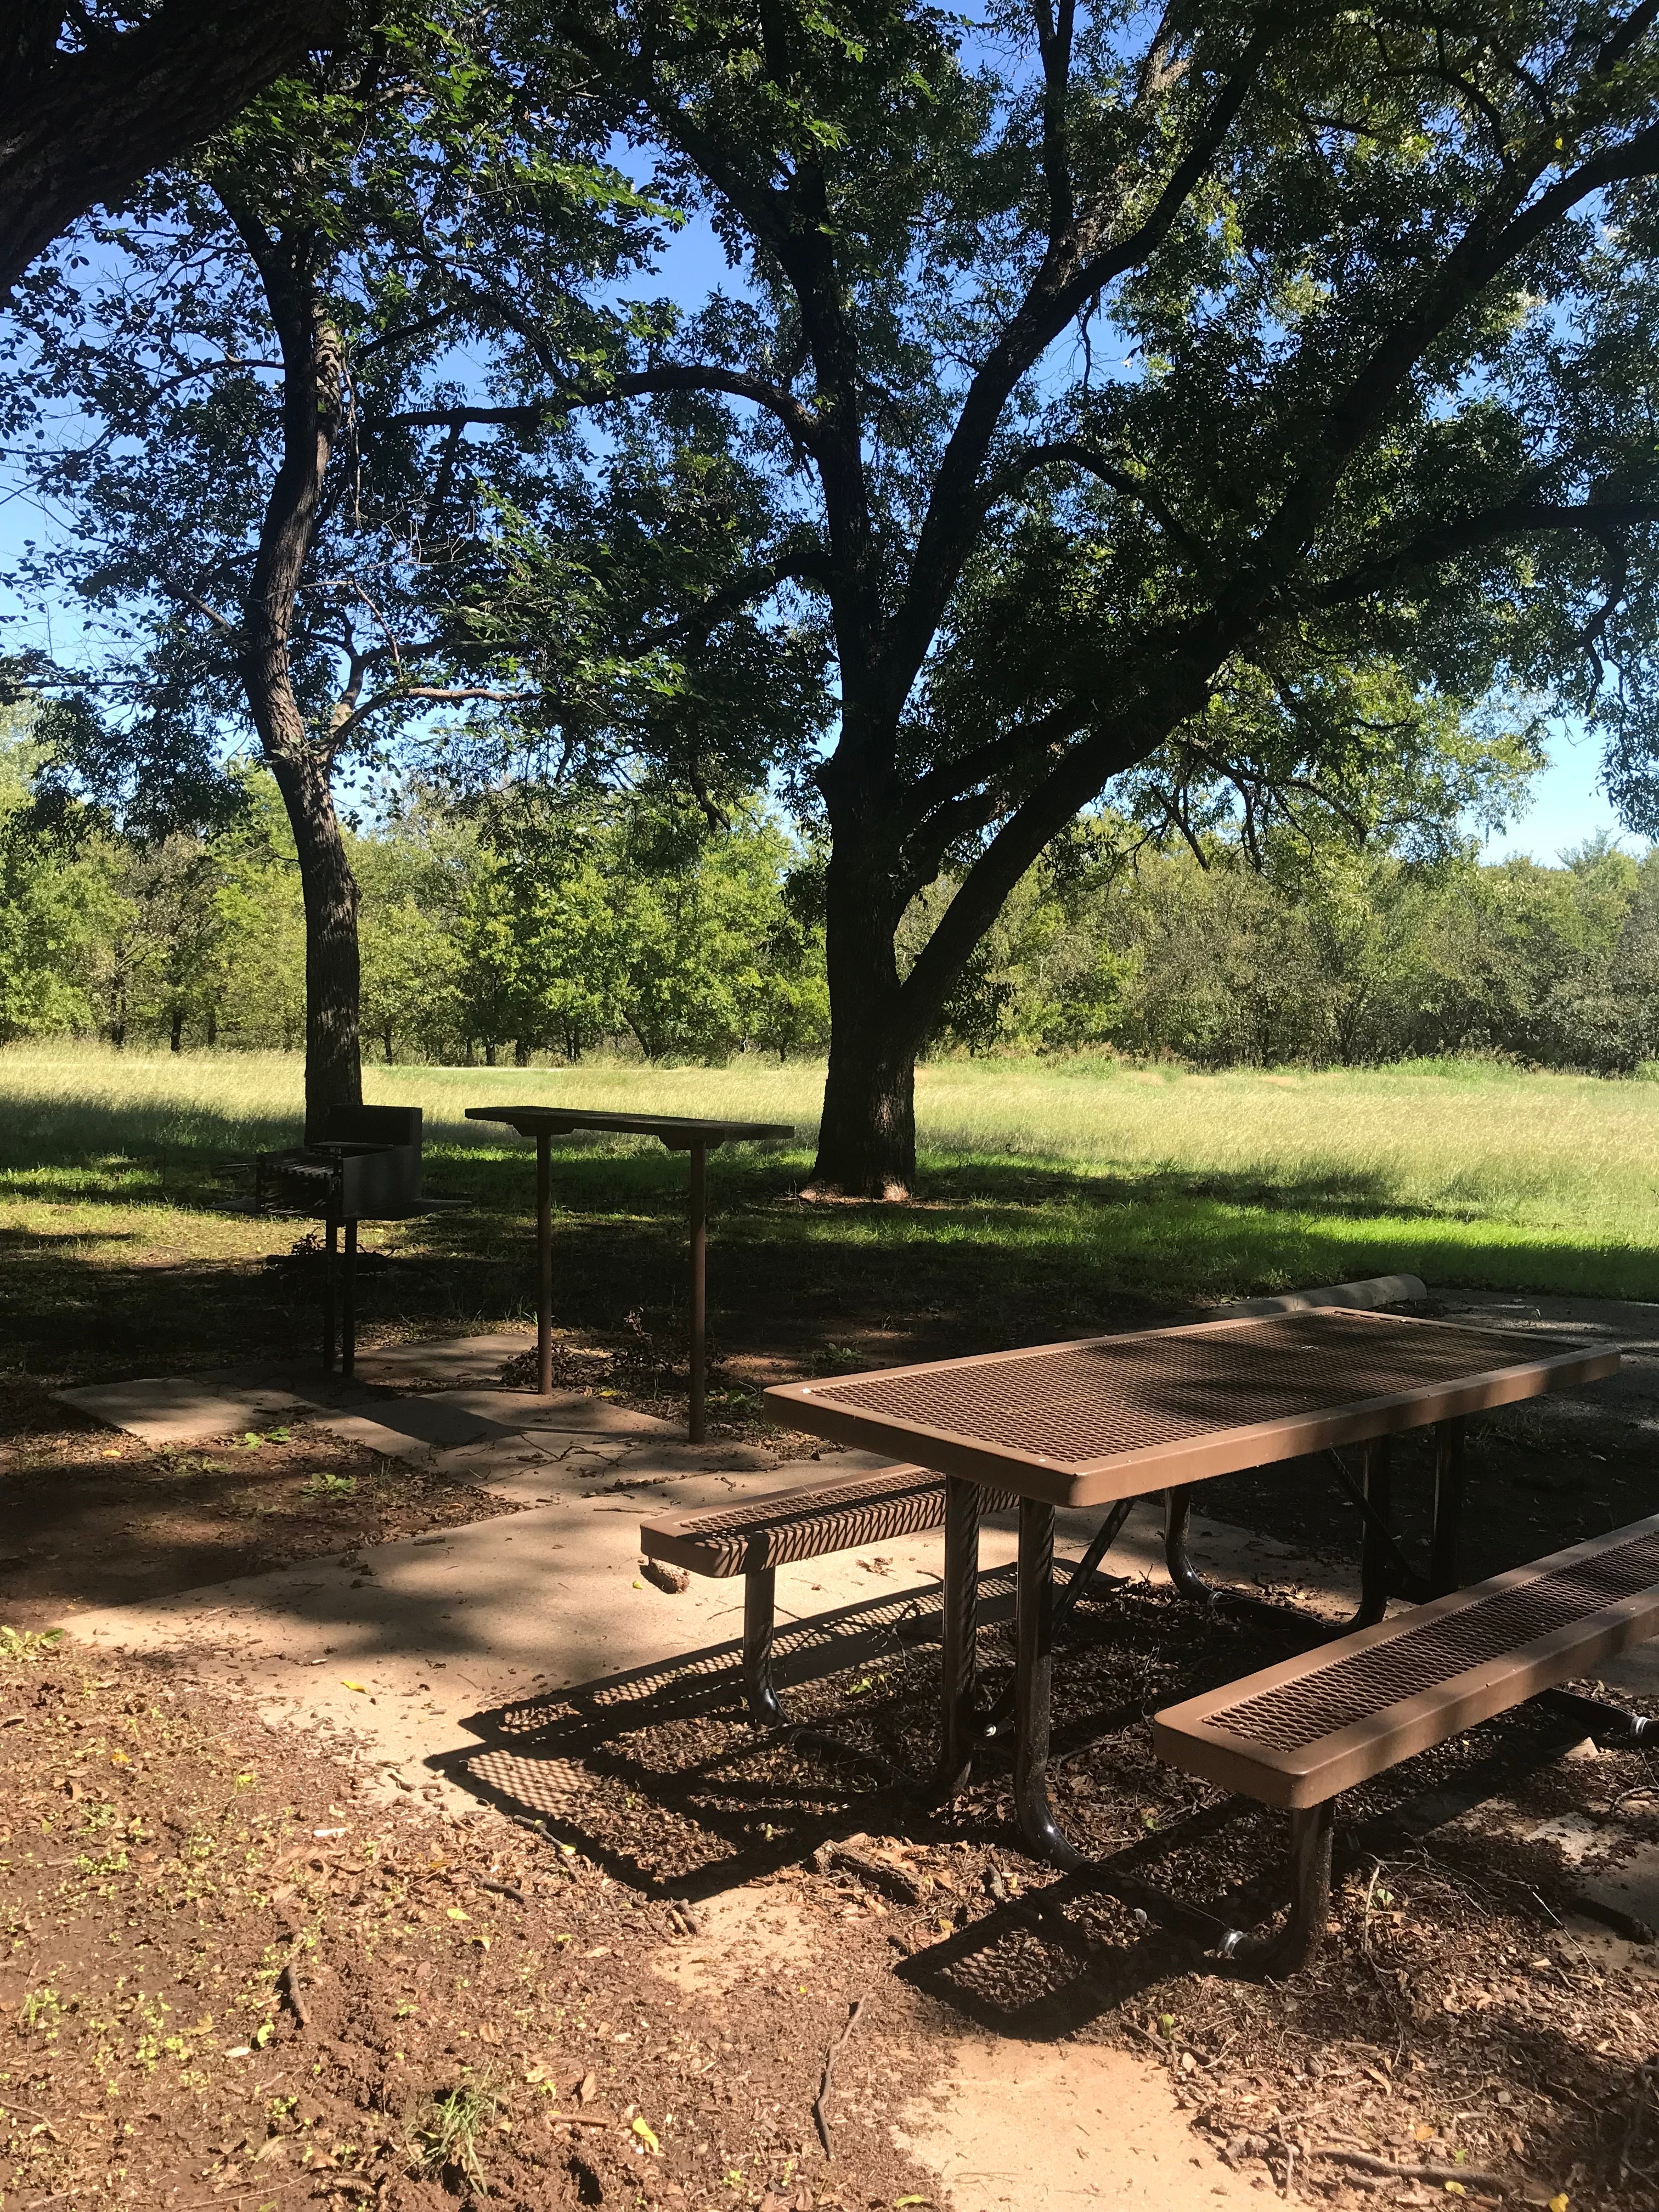 most of the campsites here have a well shaded canopy and is equipped with picnic table, grill and prep station